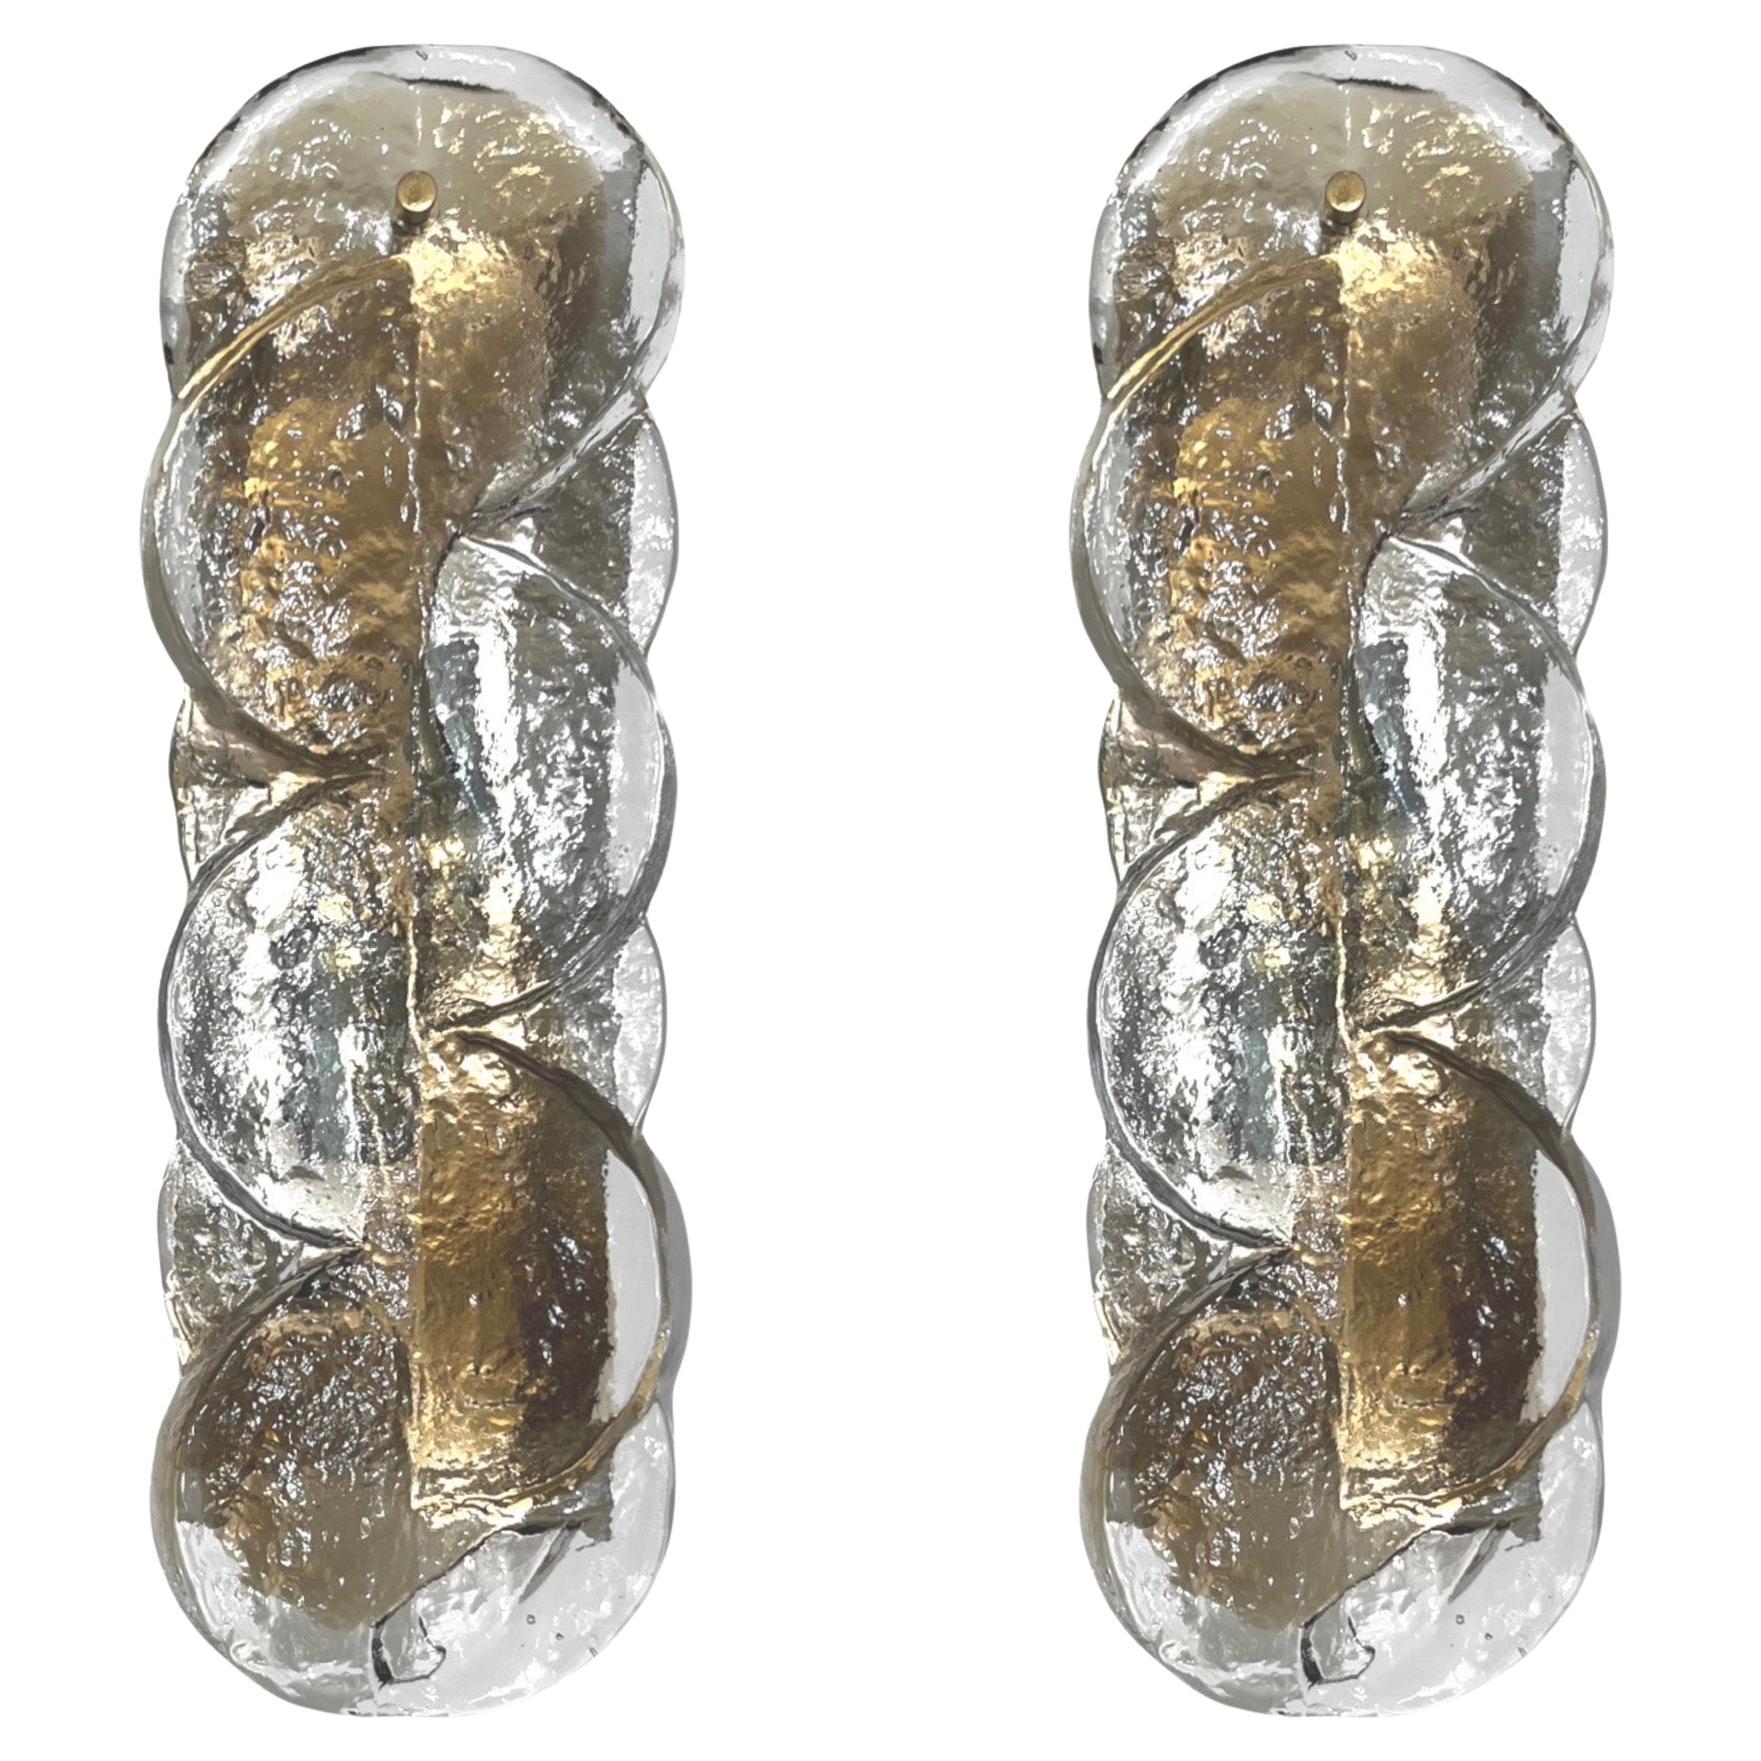 Austrian Mid-Century Pair of "Citrus" Murano Glass Wall Sconces by Kalmar, 1970s For Sale